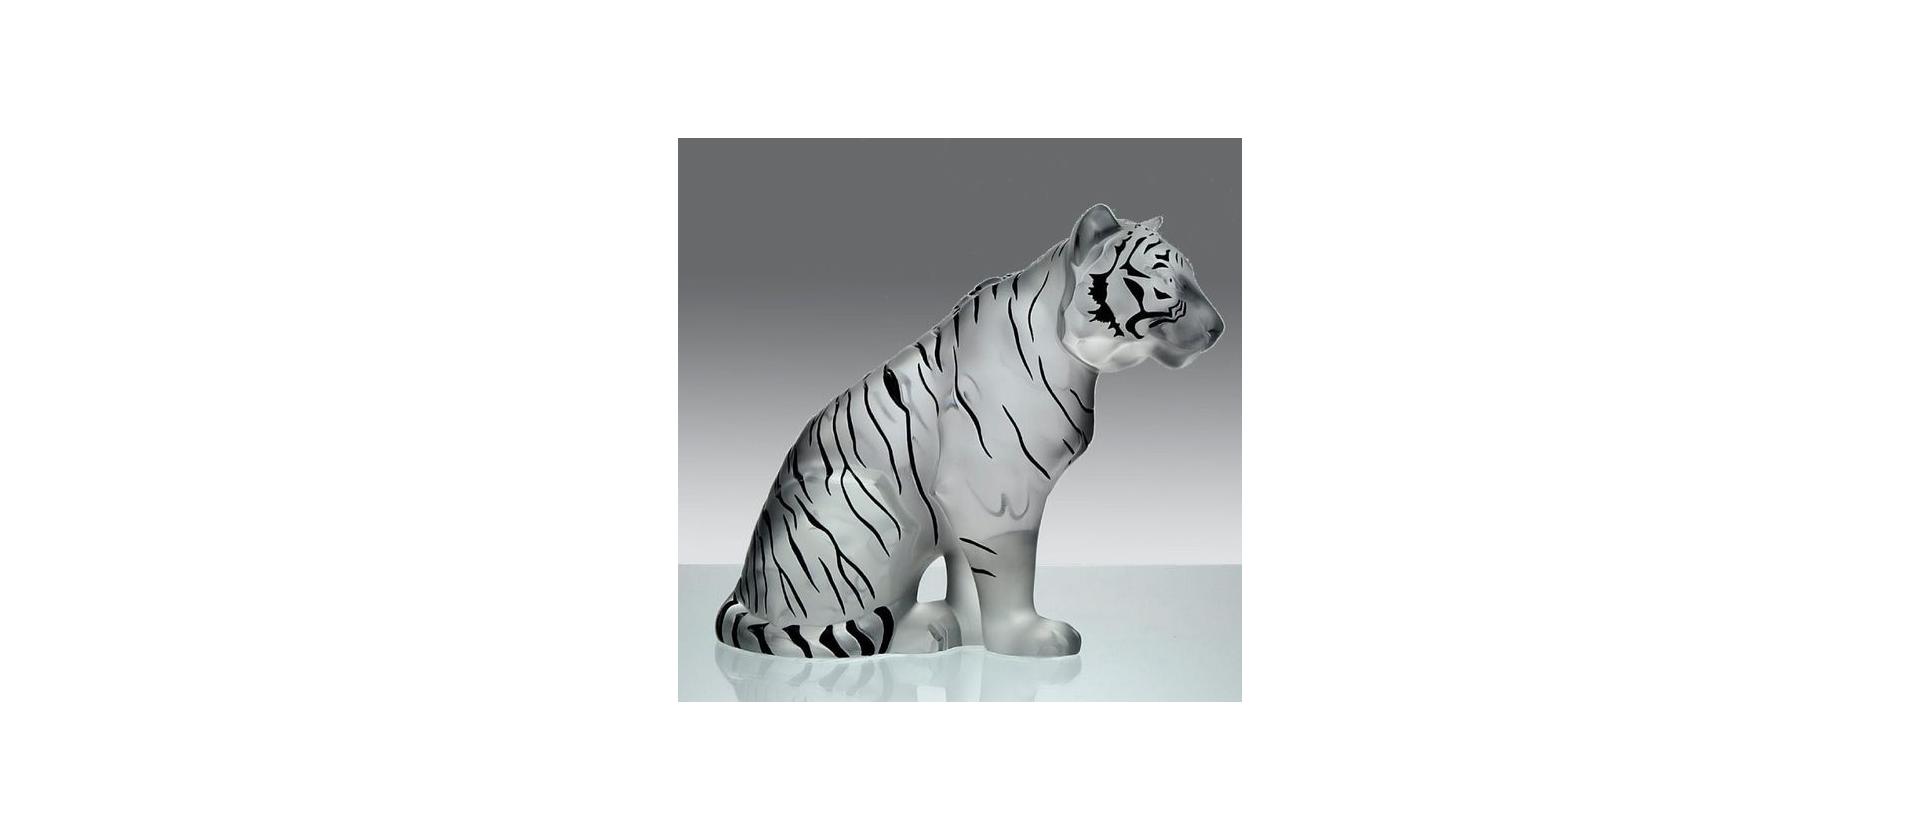 Sculpture of the great seated tiger 2022 Lalique big